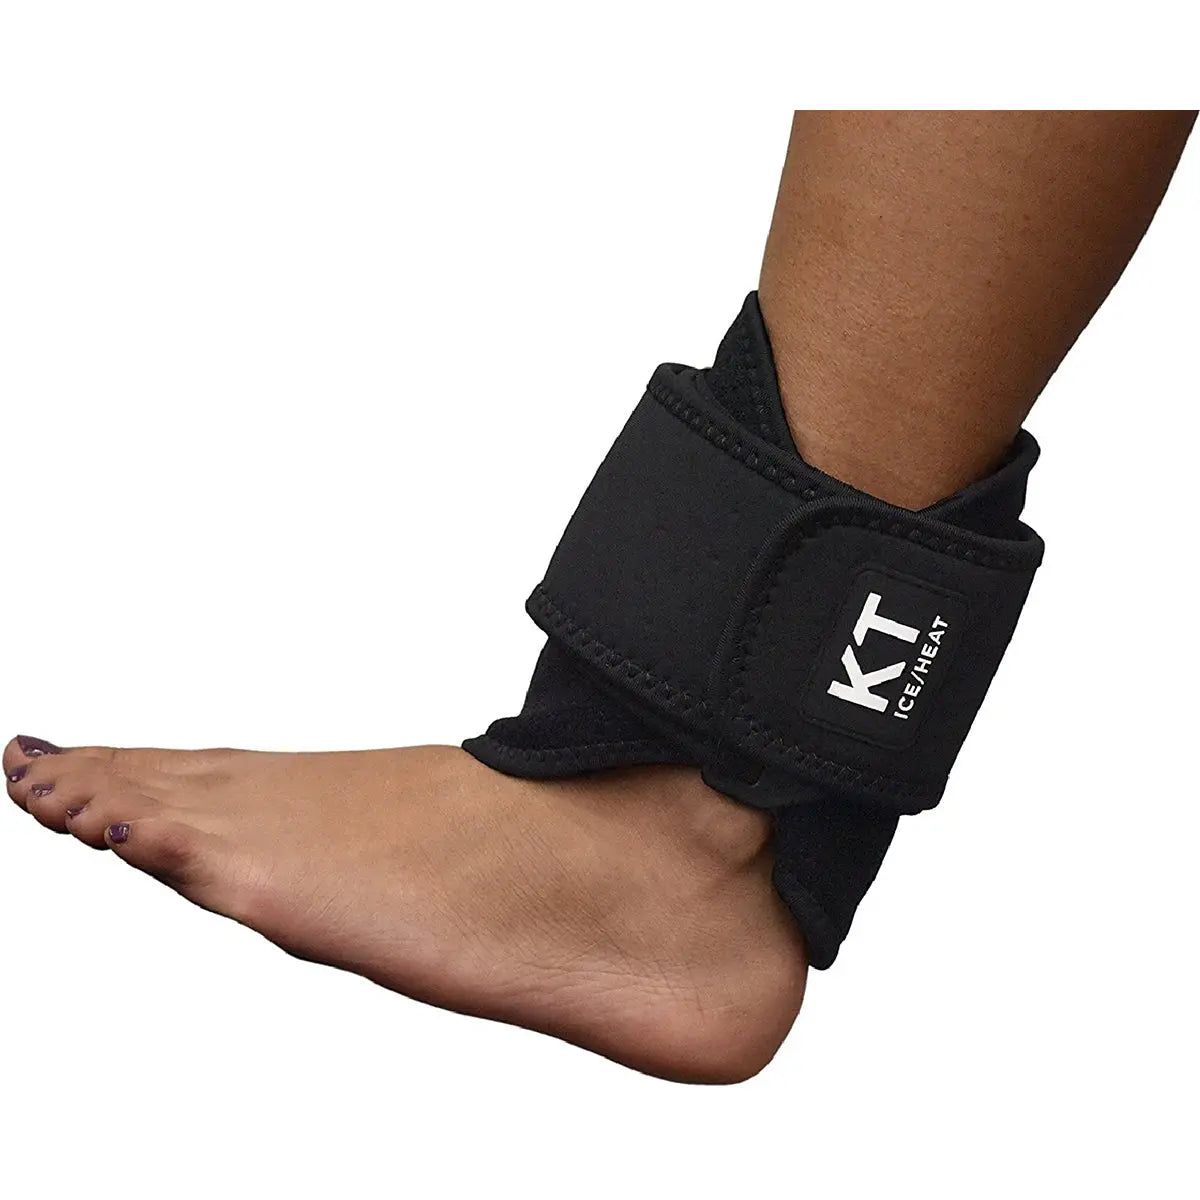 KT Tape Recovery Ice and Heat Compression Therapy Adjustable Wrap System KT Tape